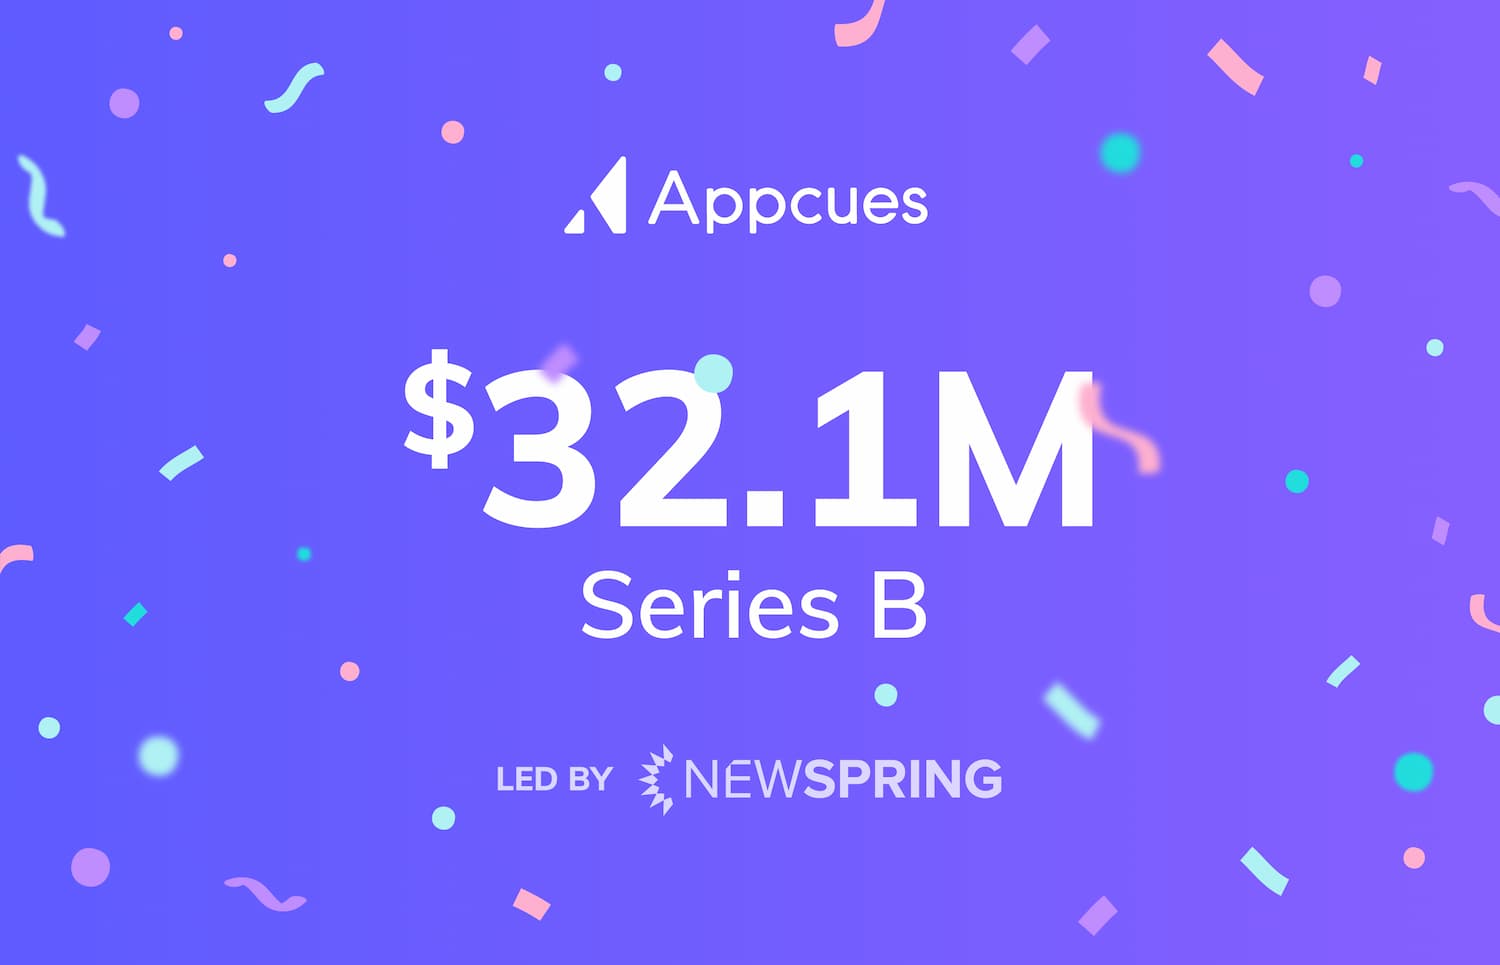 text: appcues raises a .1M investment round